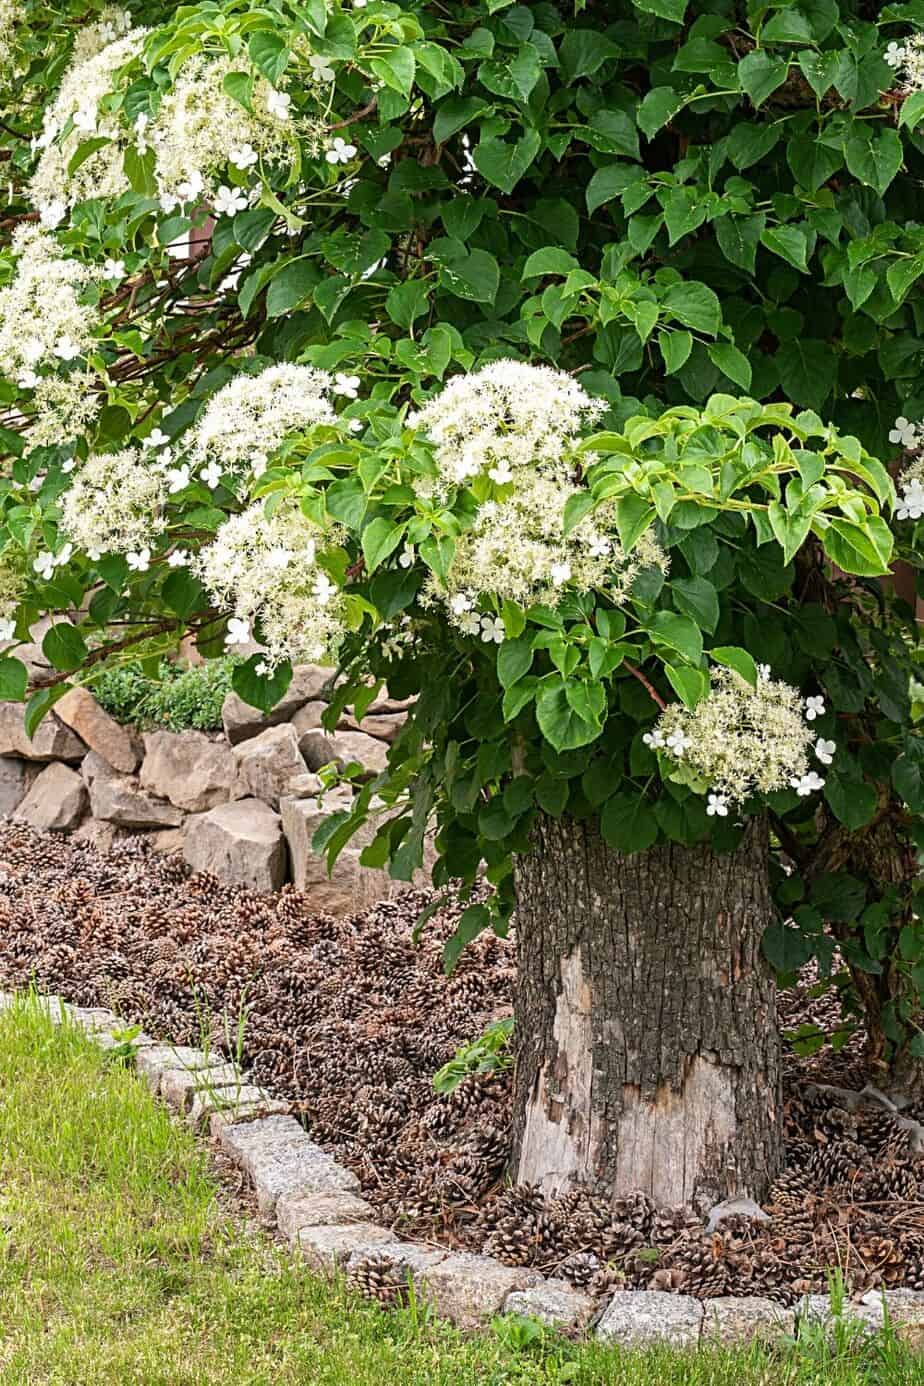 Hydrangea integrifolia wilt when exposed to direct sunlight, hence, it's best to grow it in shaded areas like a northwest-facing garden